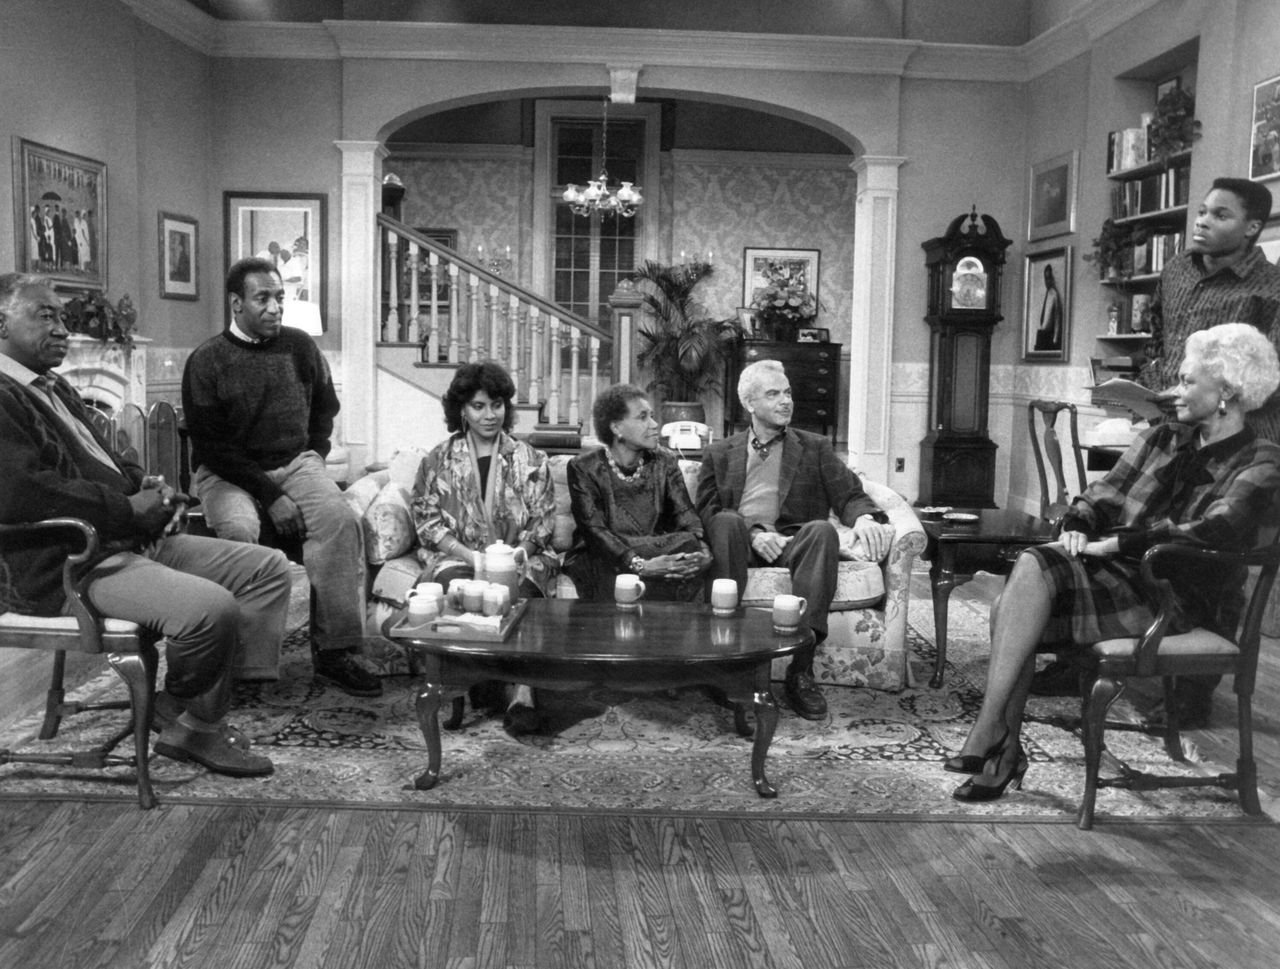 Cast members on the set of "The Cosby Show" in 1986.